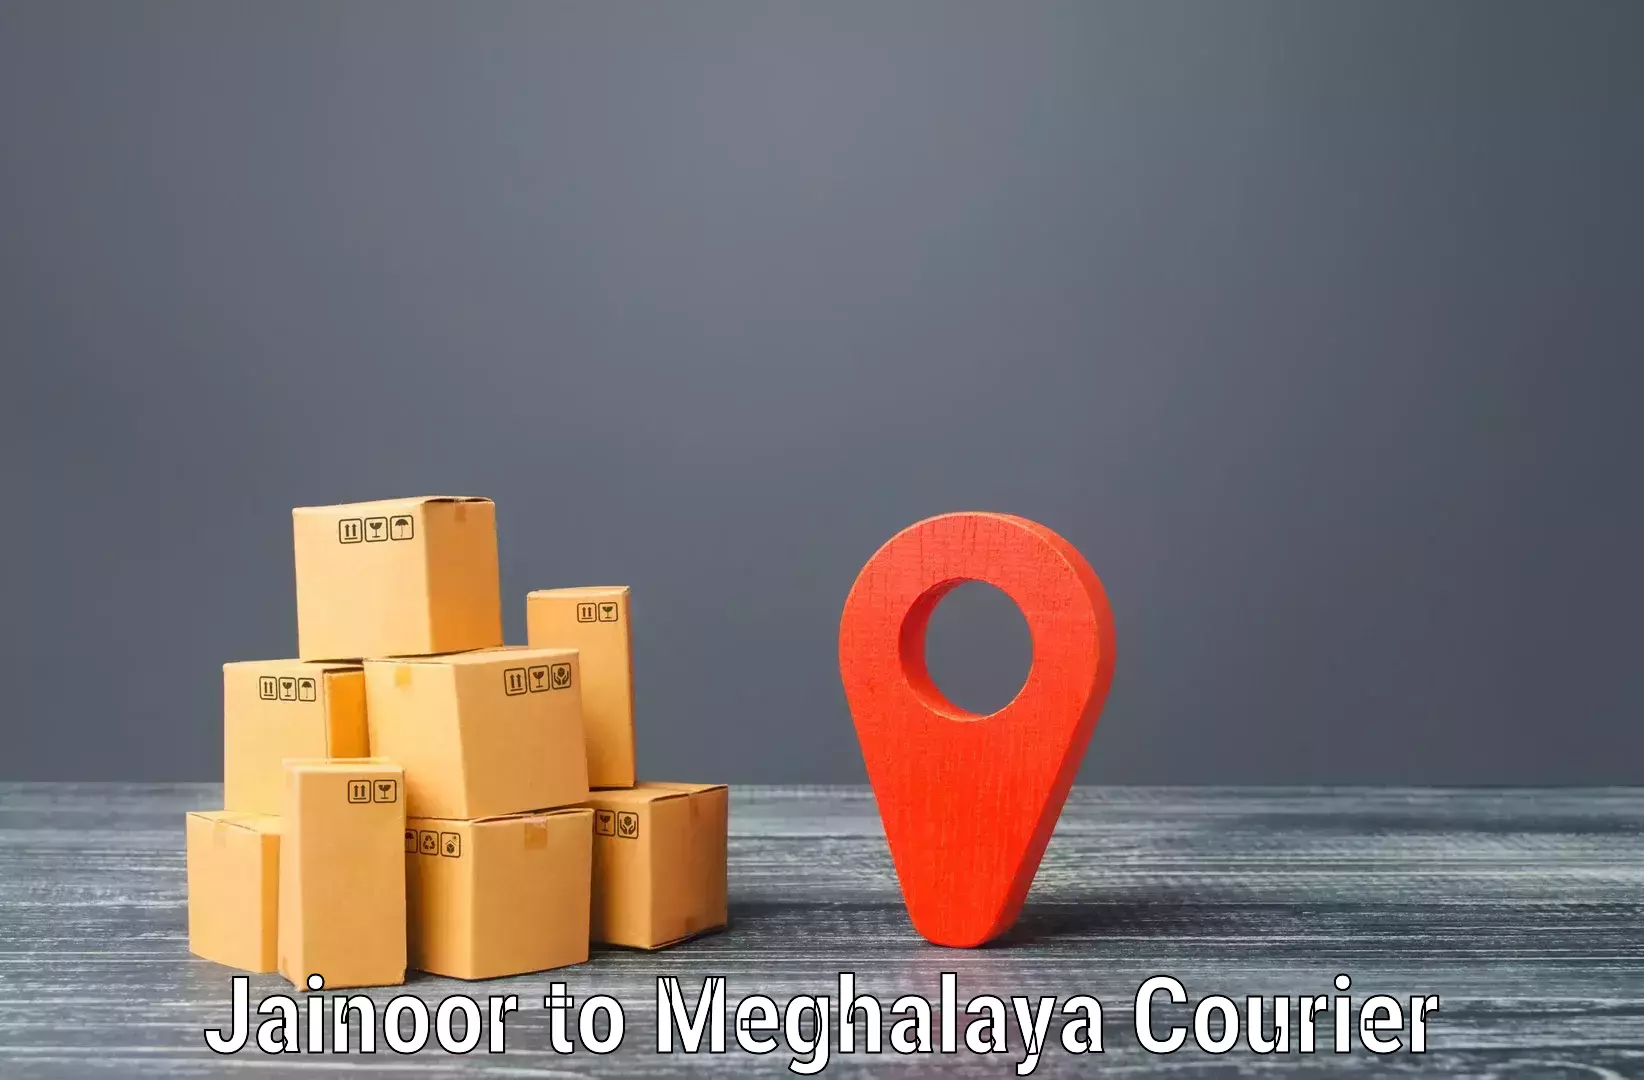 Next-day delivery options Jainoor to Shillong